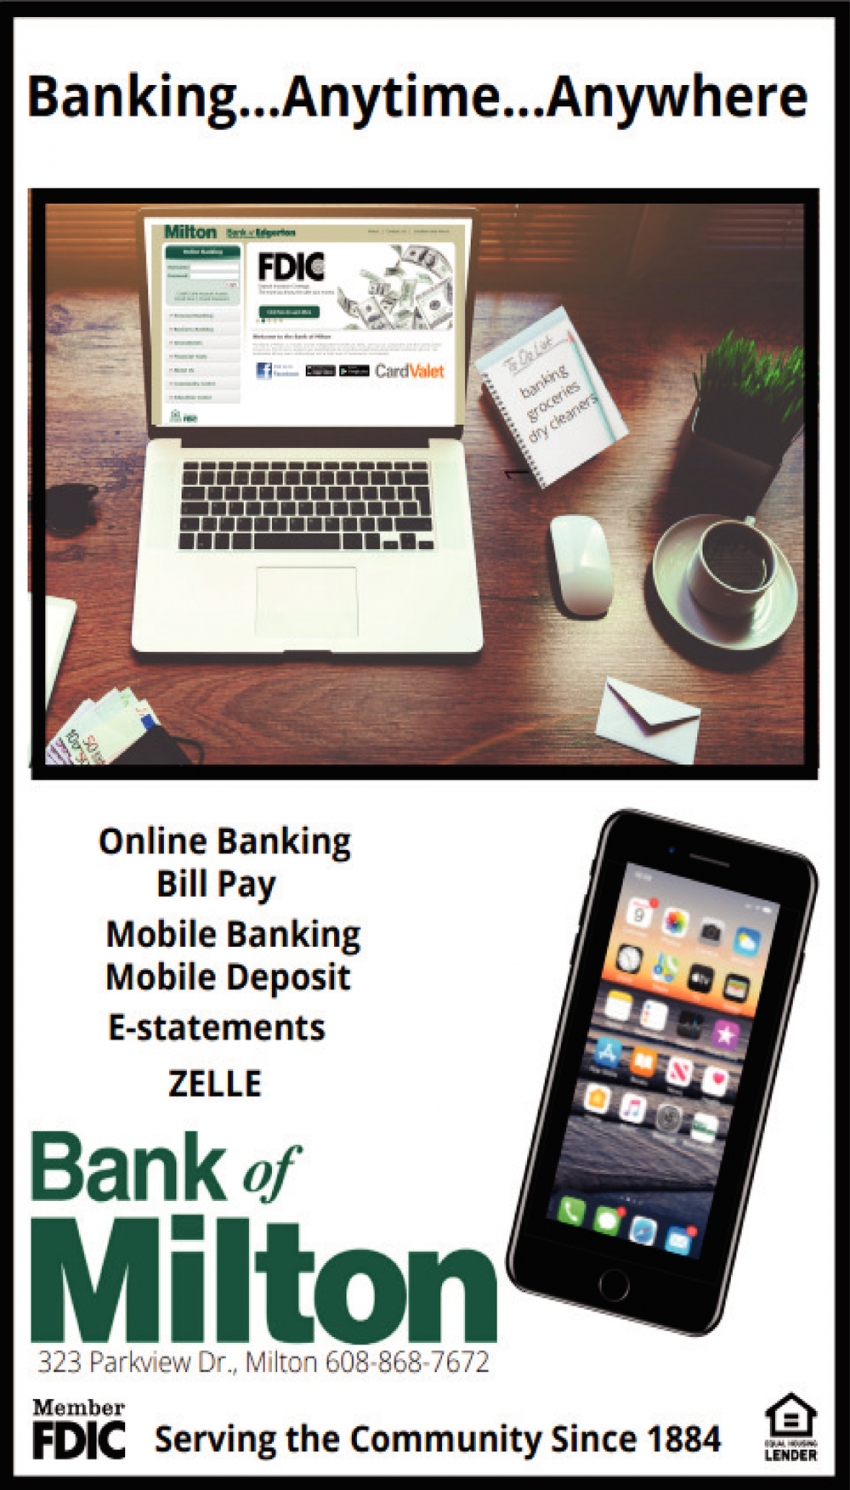 Banking... Anytime... Anywhere